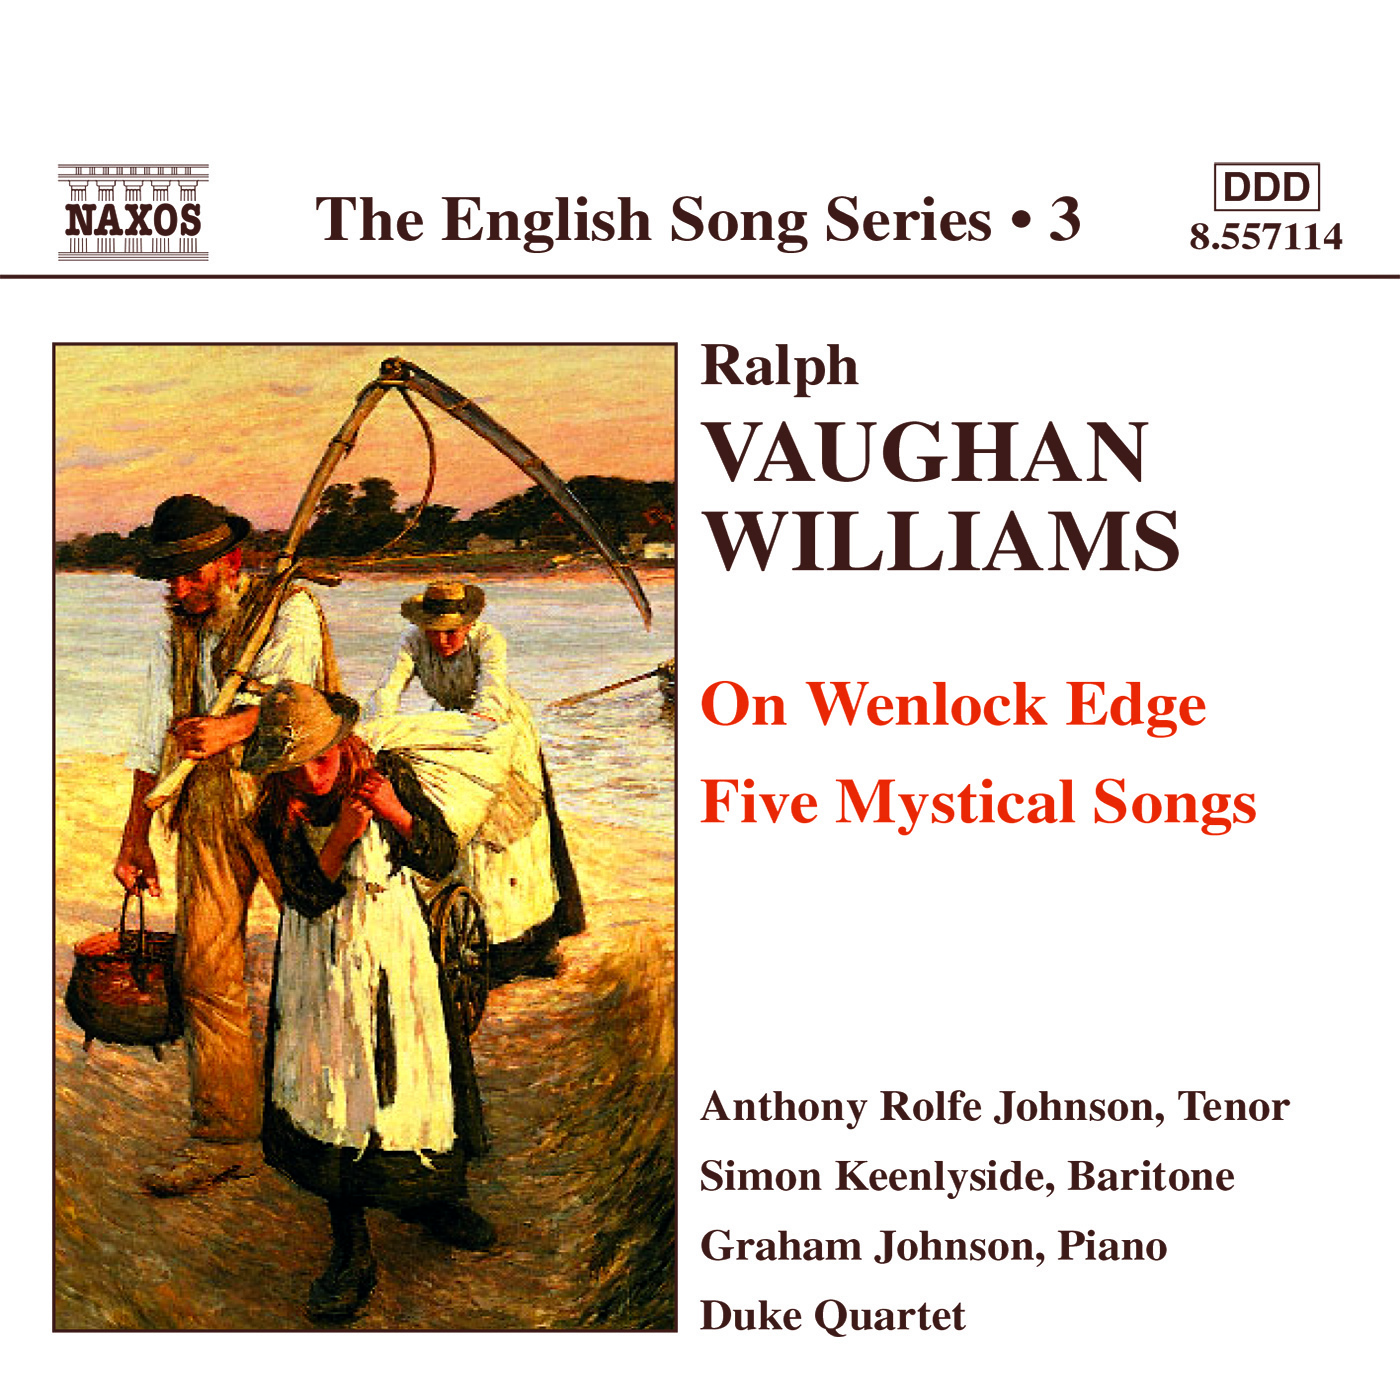 VAUGHAN WILLIAMS: On Wenlock Edge / Five Mystical Songs (English Song, Vol. 3)